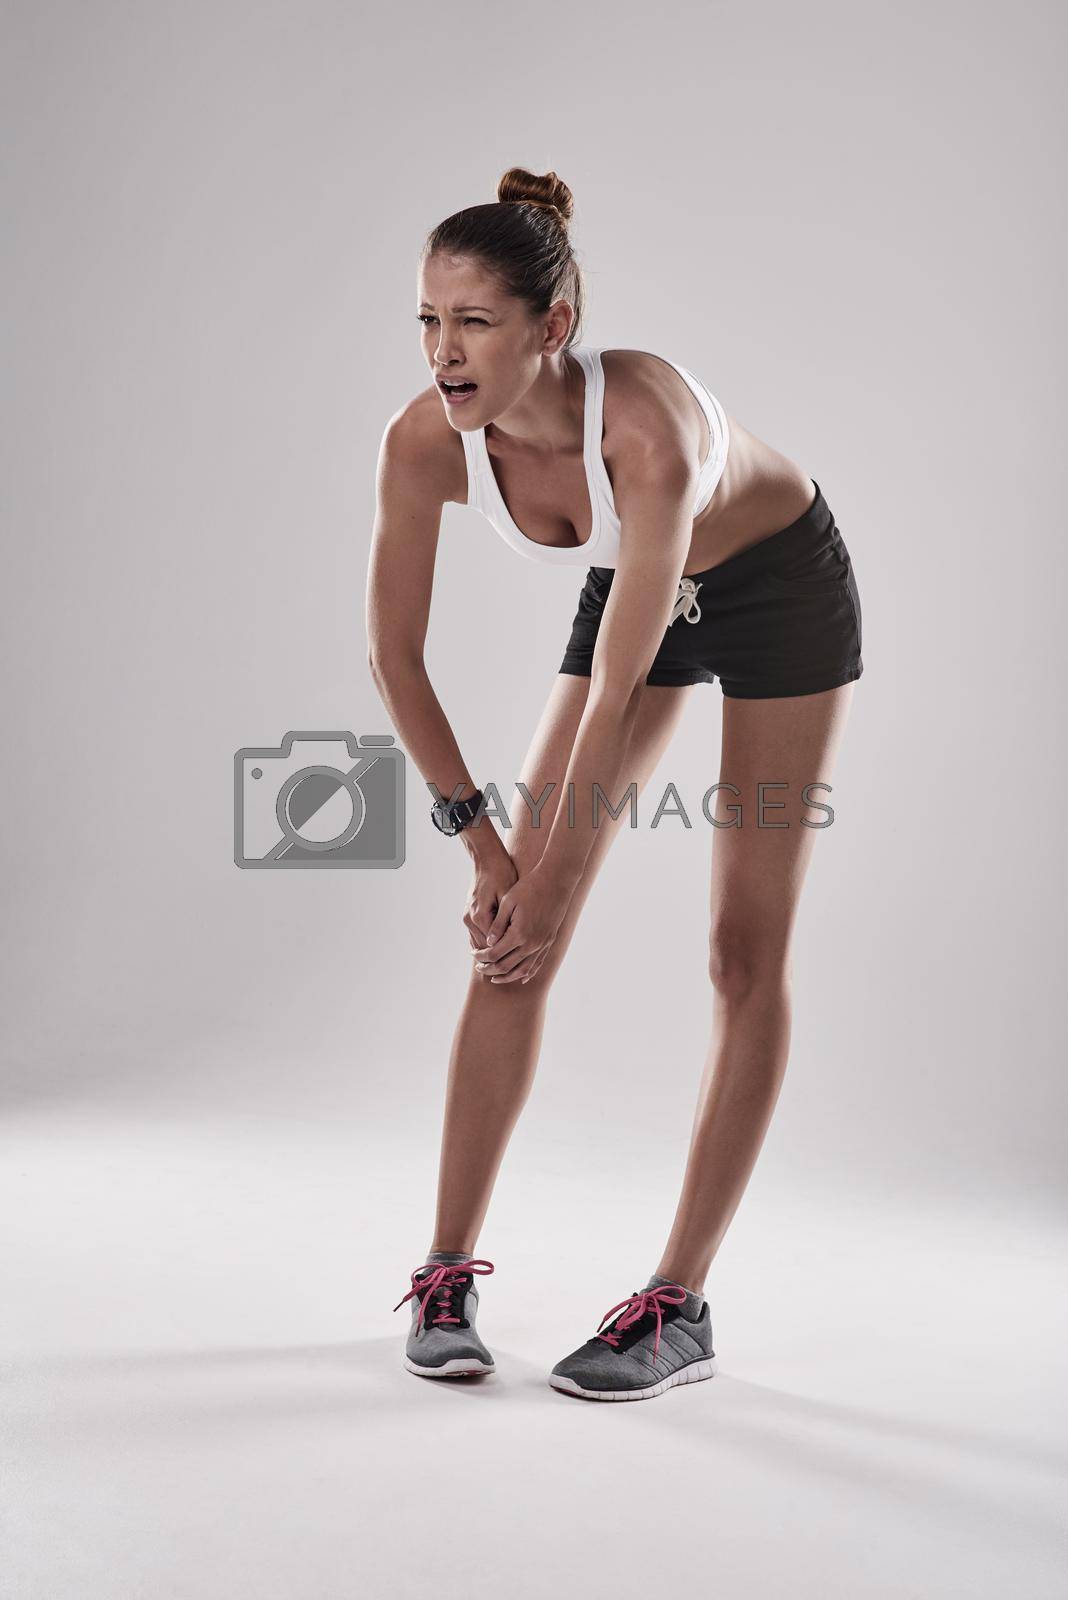 Royalty free image of Pain is acceptable, injury is acceptable but quitting is unacceptable. Studio shot of an athlete with an injury. by YuriArcurs